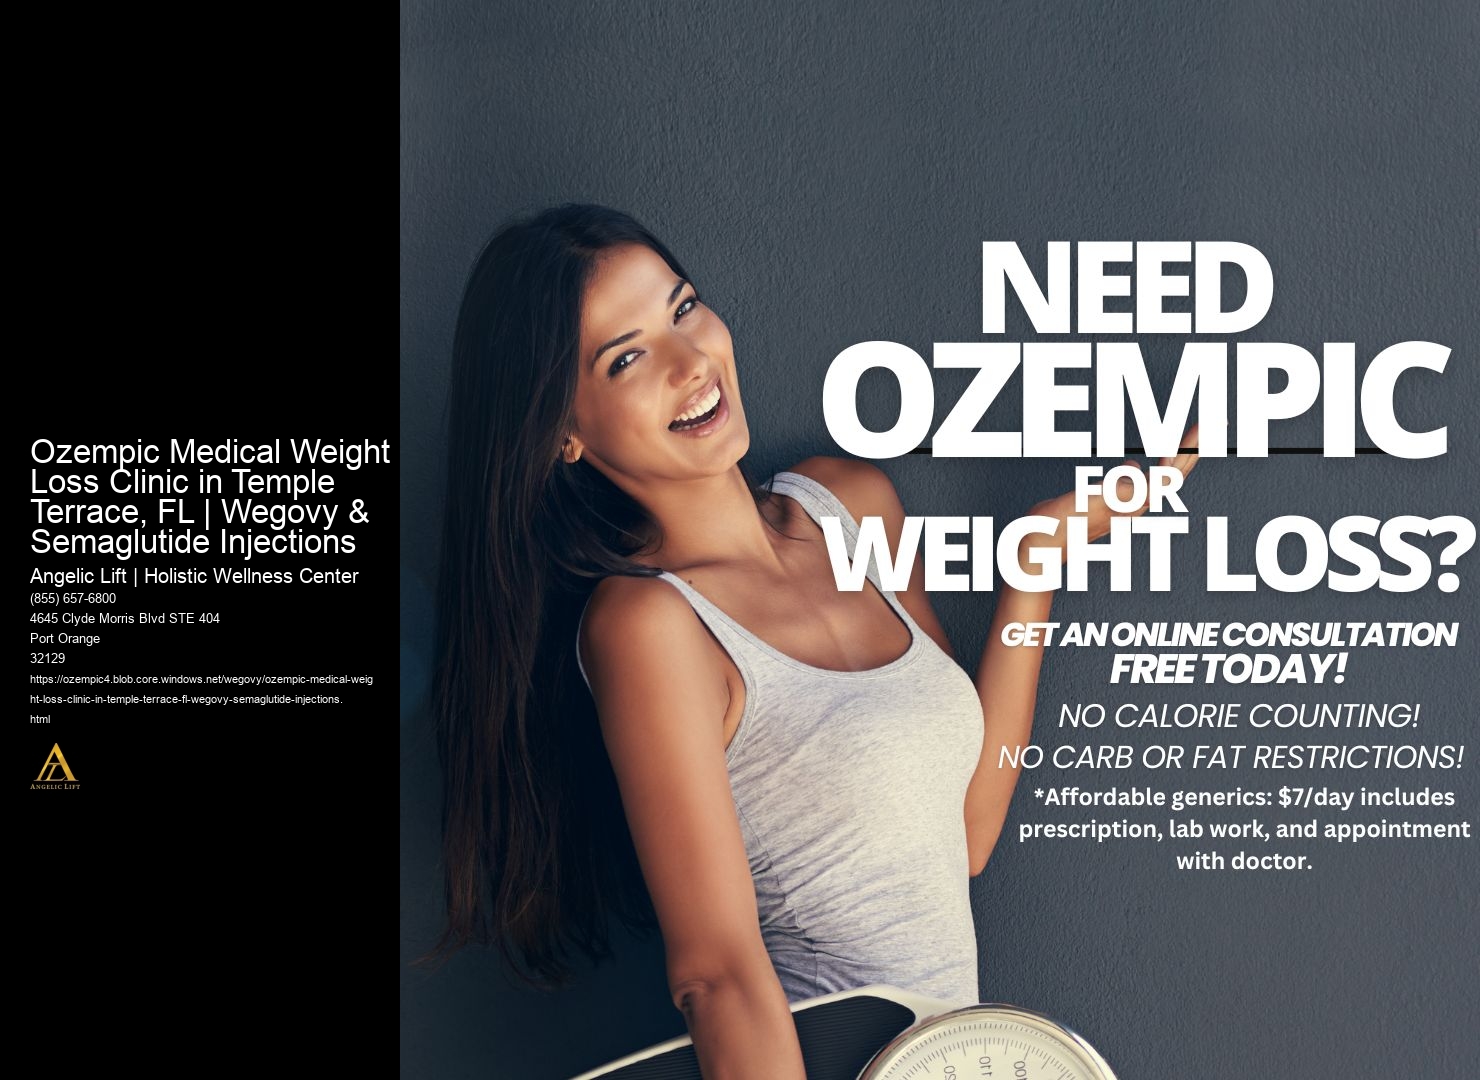 Ozempic Medical Weight Loss Clinic in Temple Terrace, FL | Wegovy & Semaglutide Injections